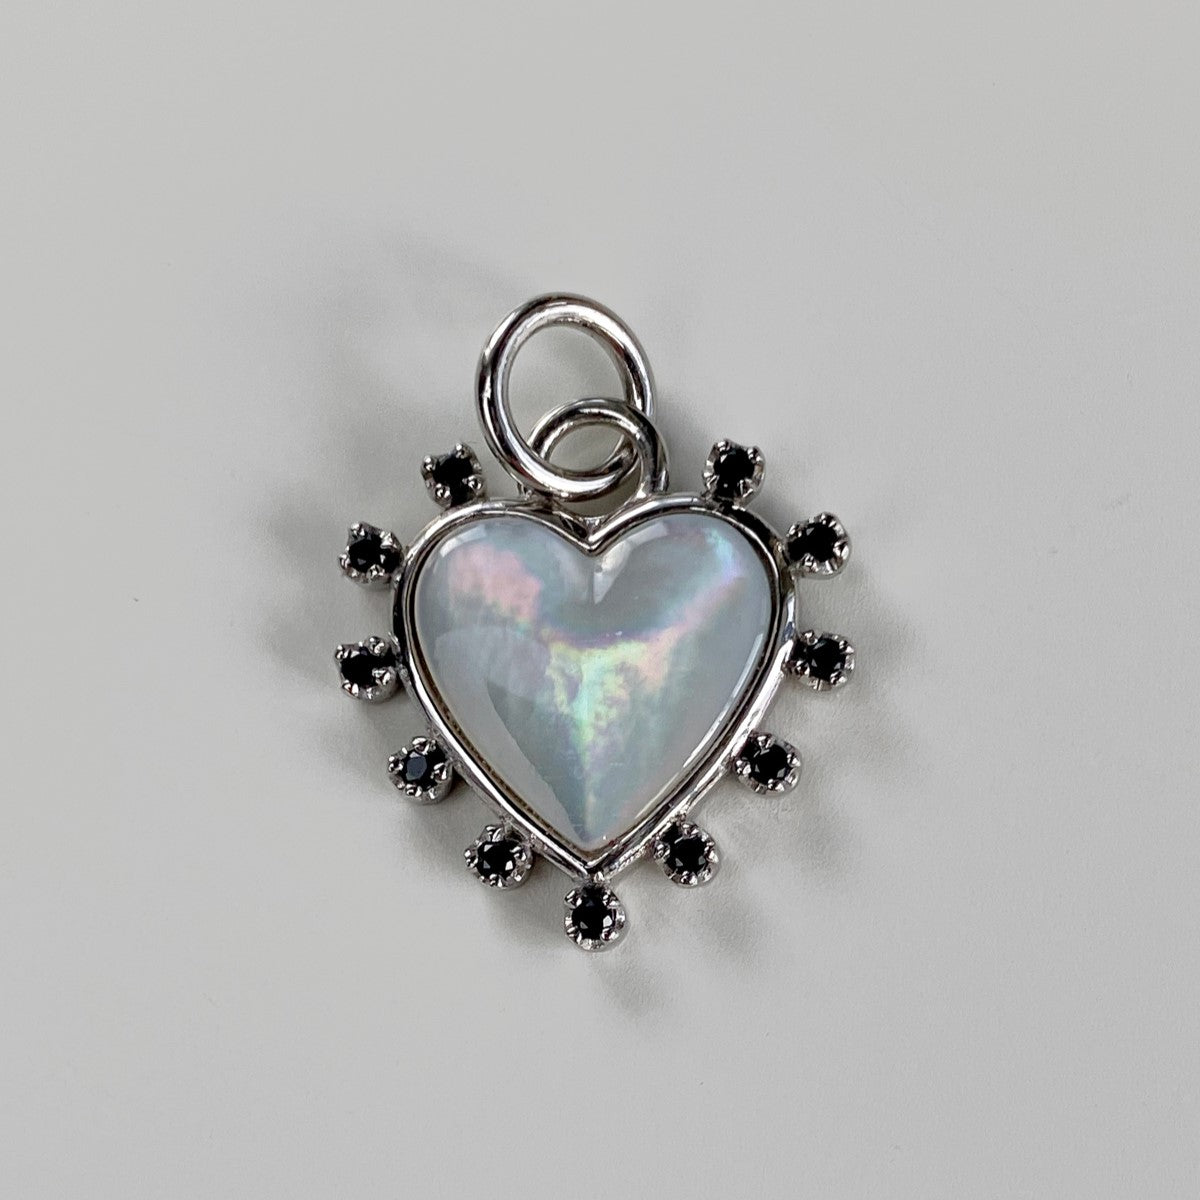 PENDANT "HEART" WITH MOTHER-OF-PEARL CAMEO & BLACK SPINEL / SILVER